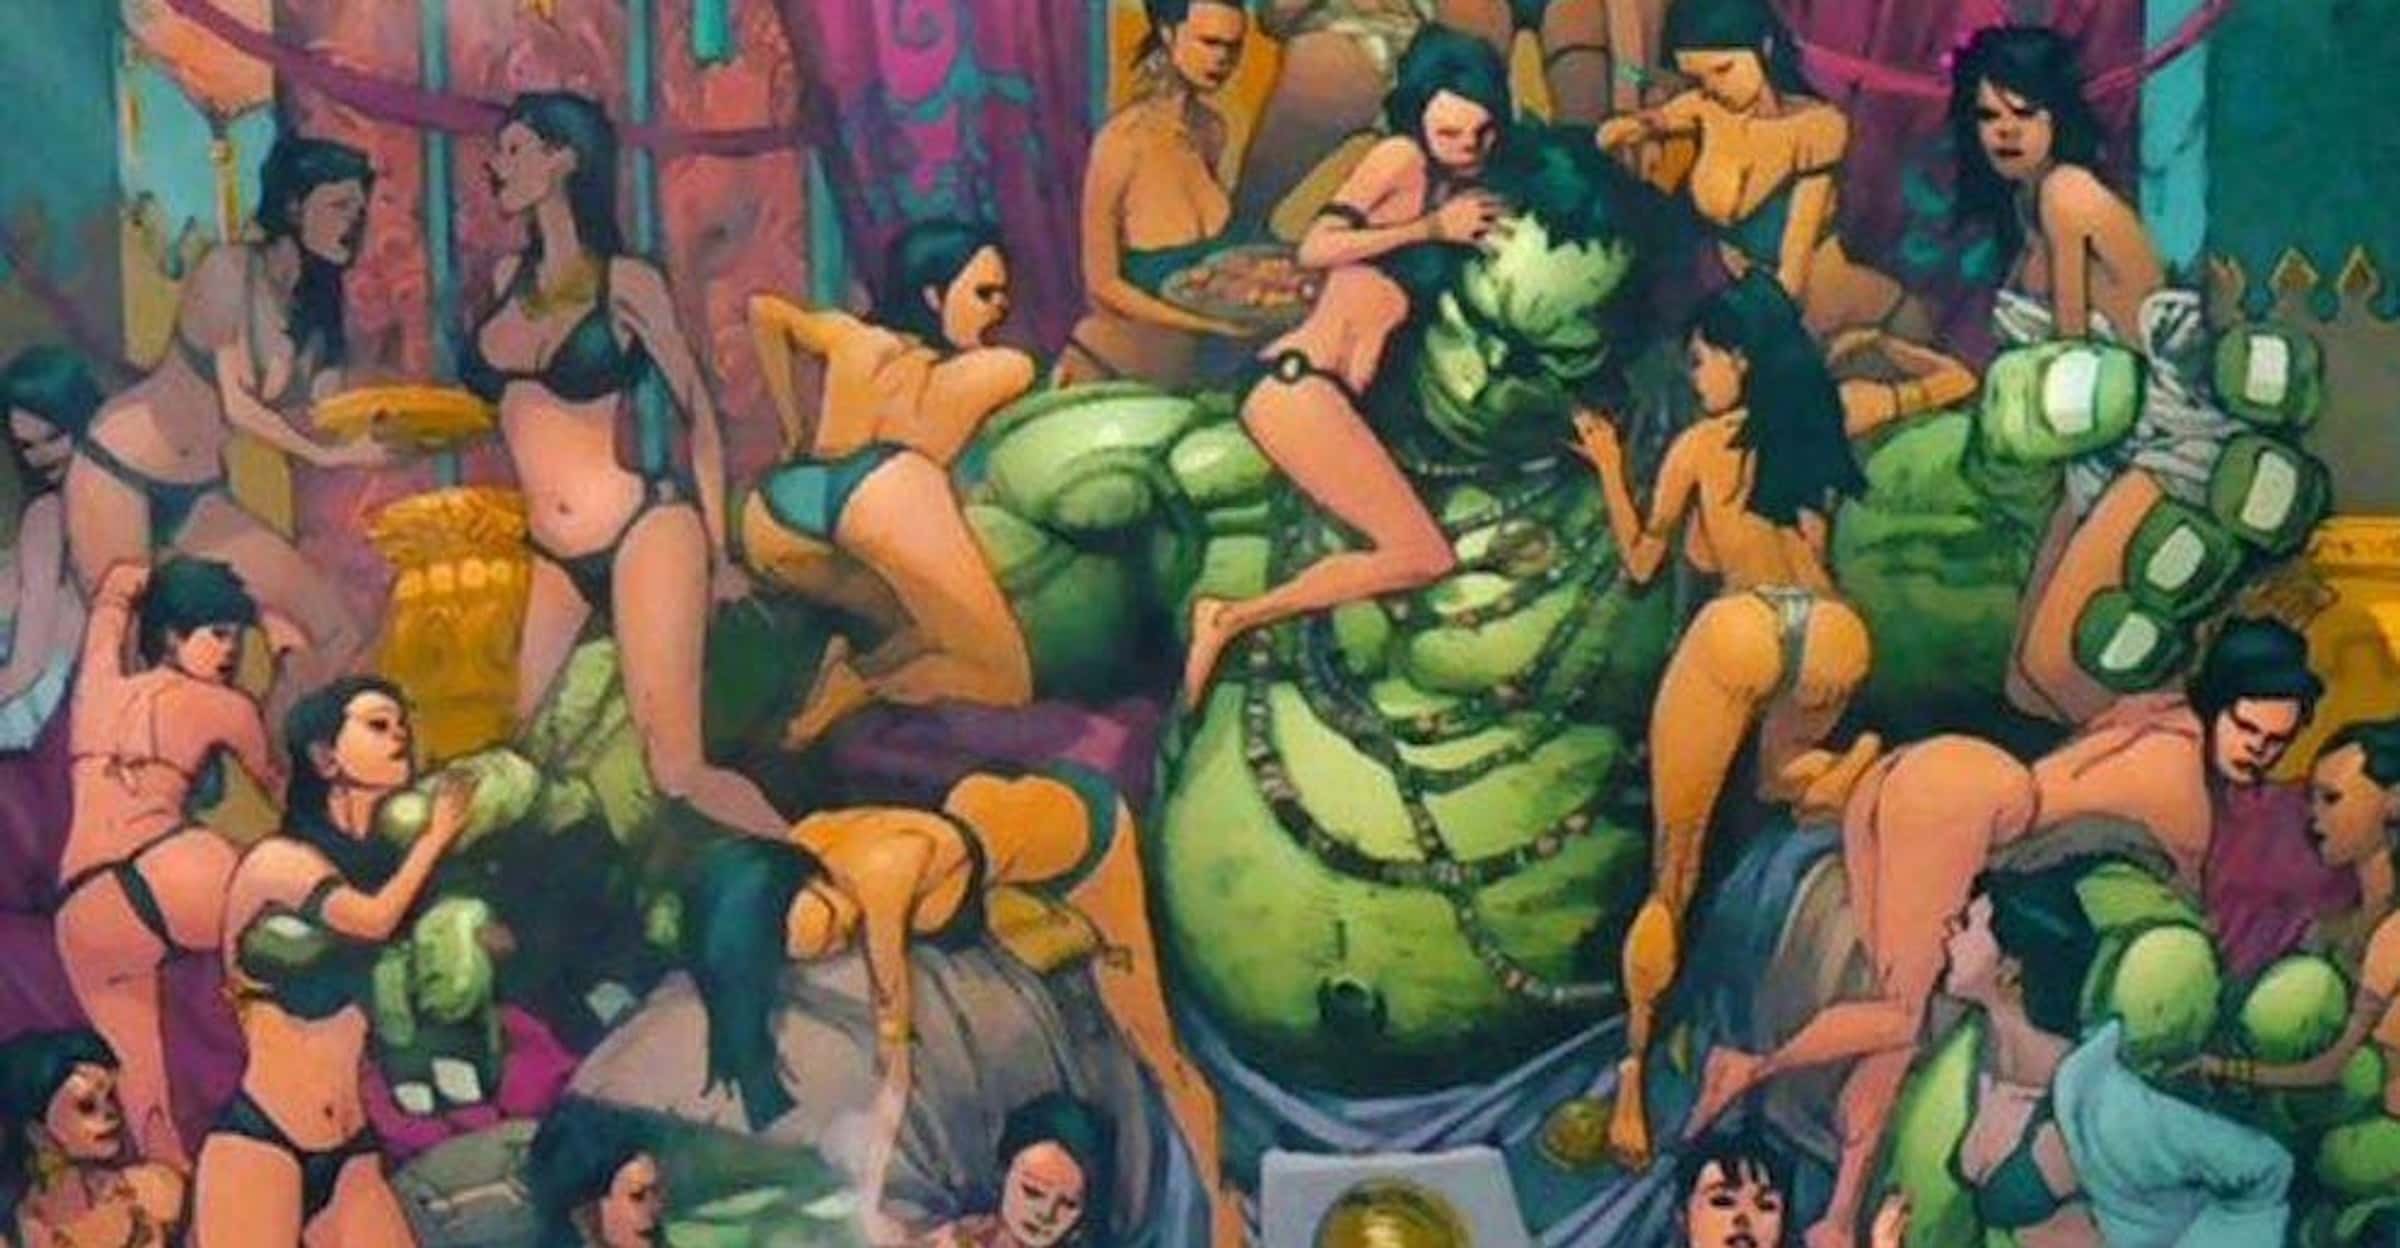 Sexy Superhero Toons Nude - The 17 Most Sexually Deviant Superheroes In Comics